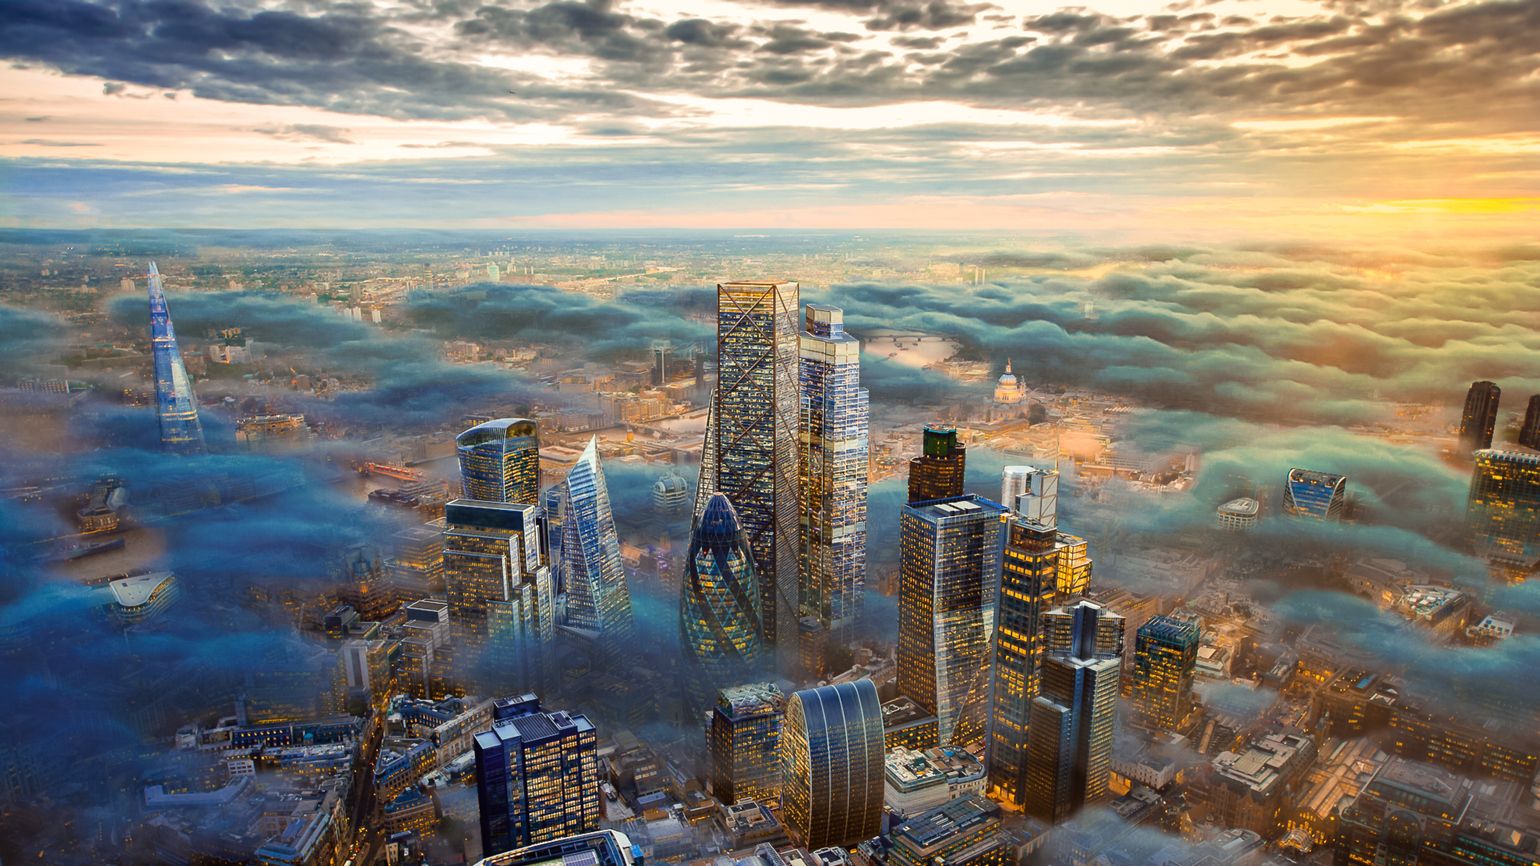 A city in the clouds is an example of what heaven looks like